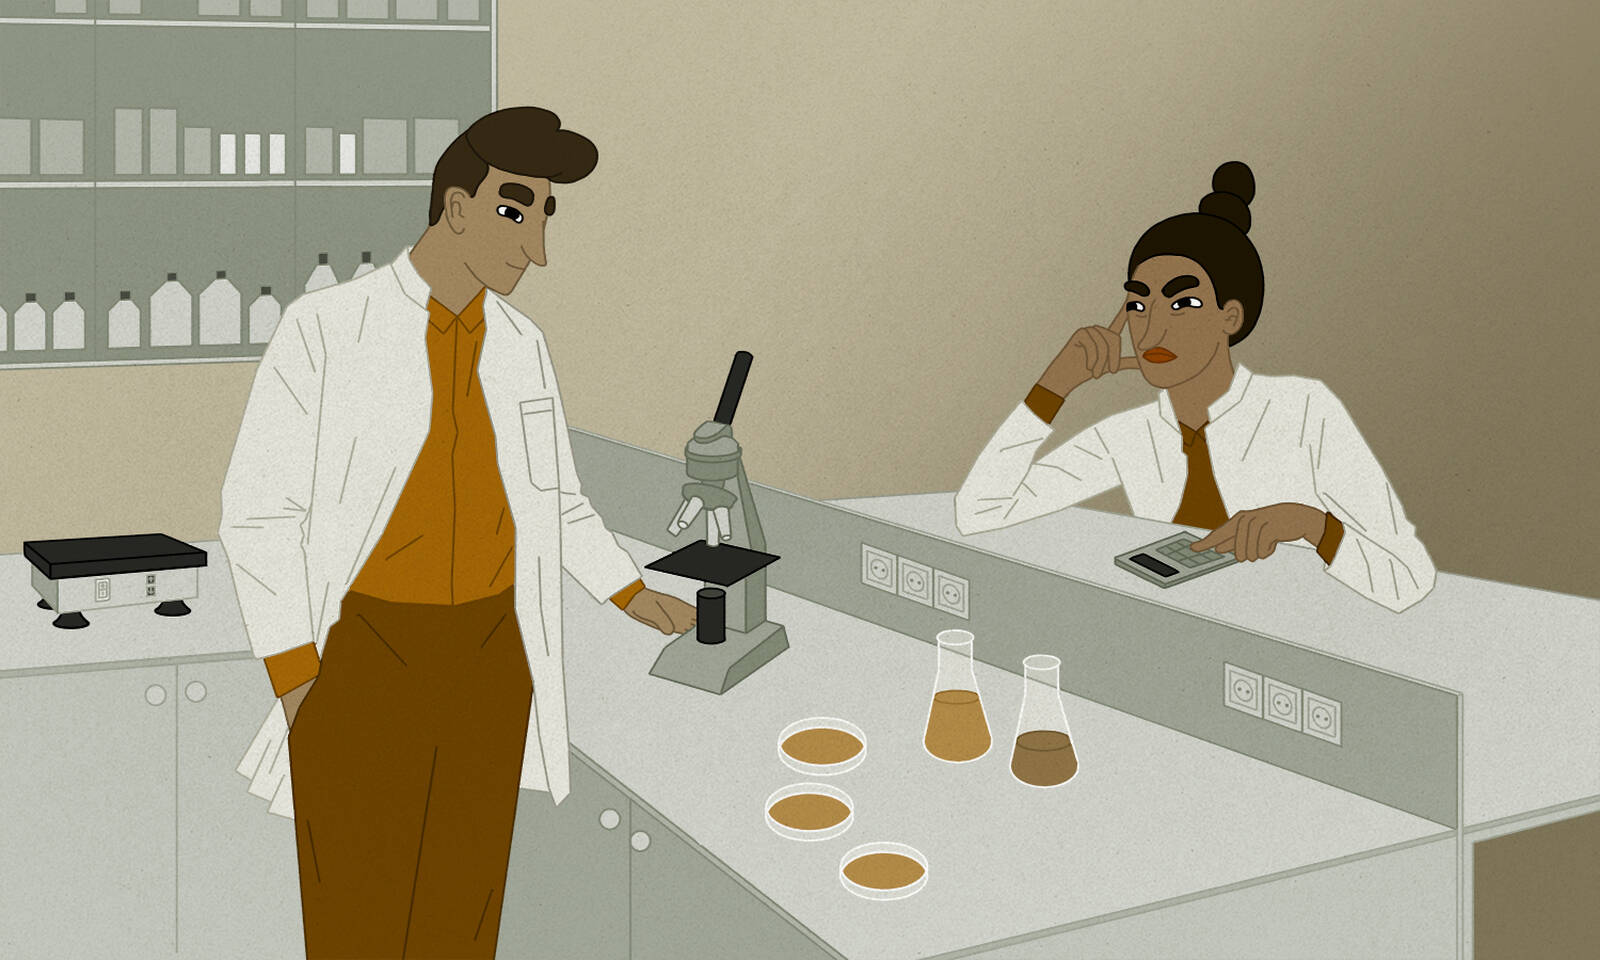 A male scientist's lab is better funded than a female scientist's lab.